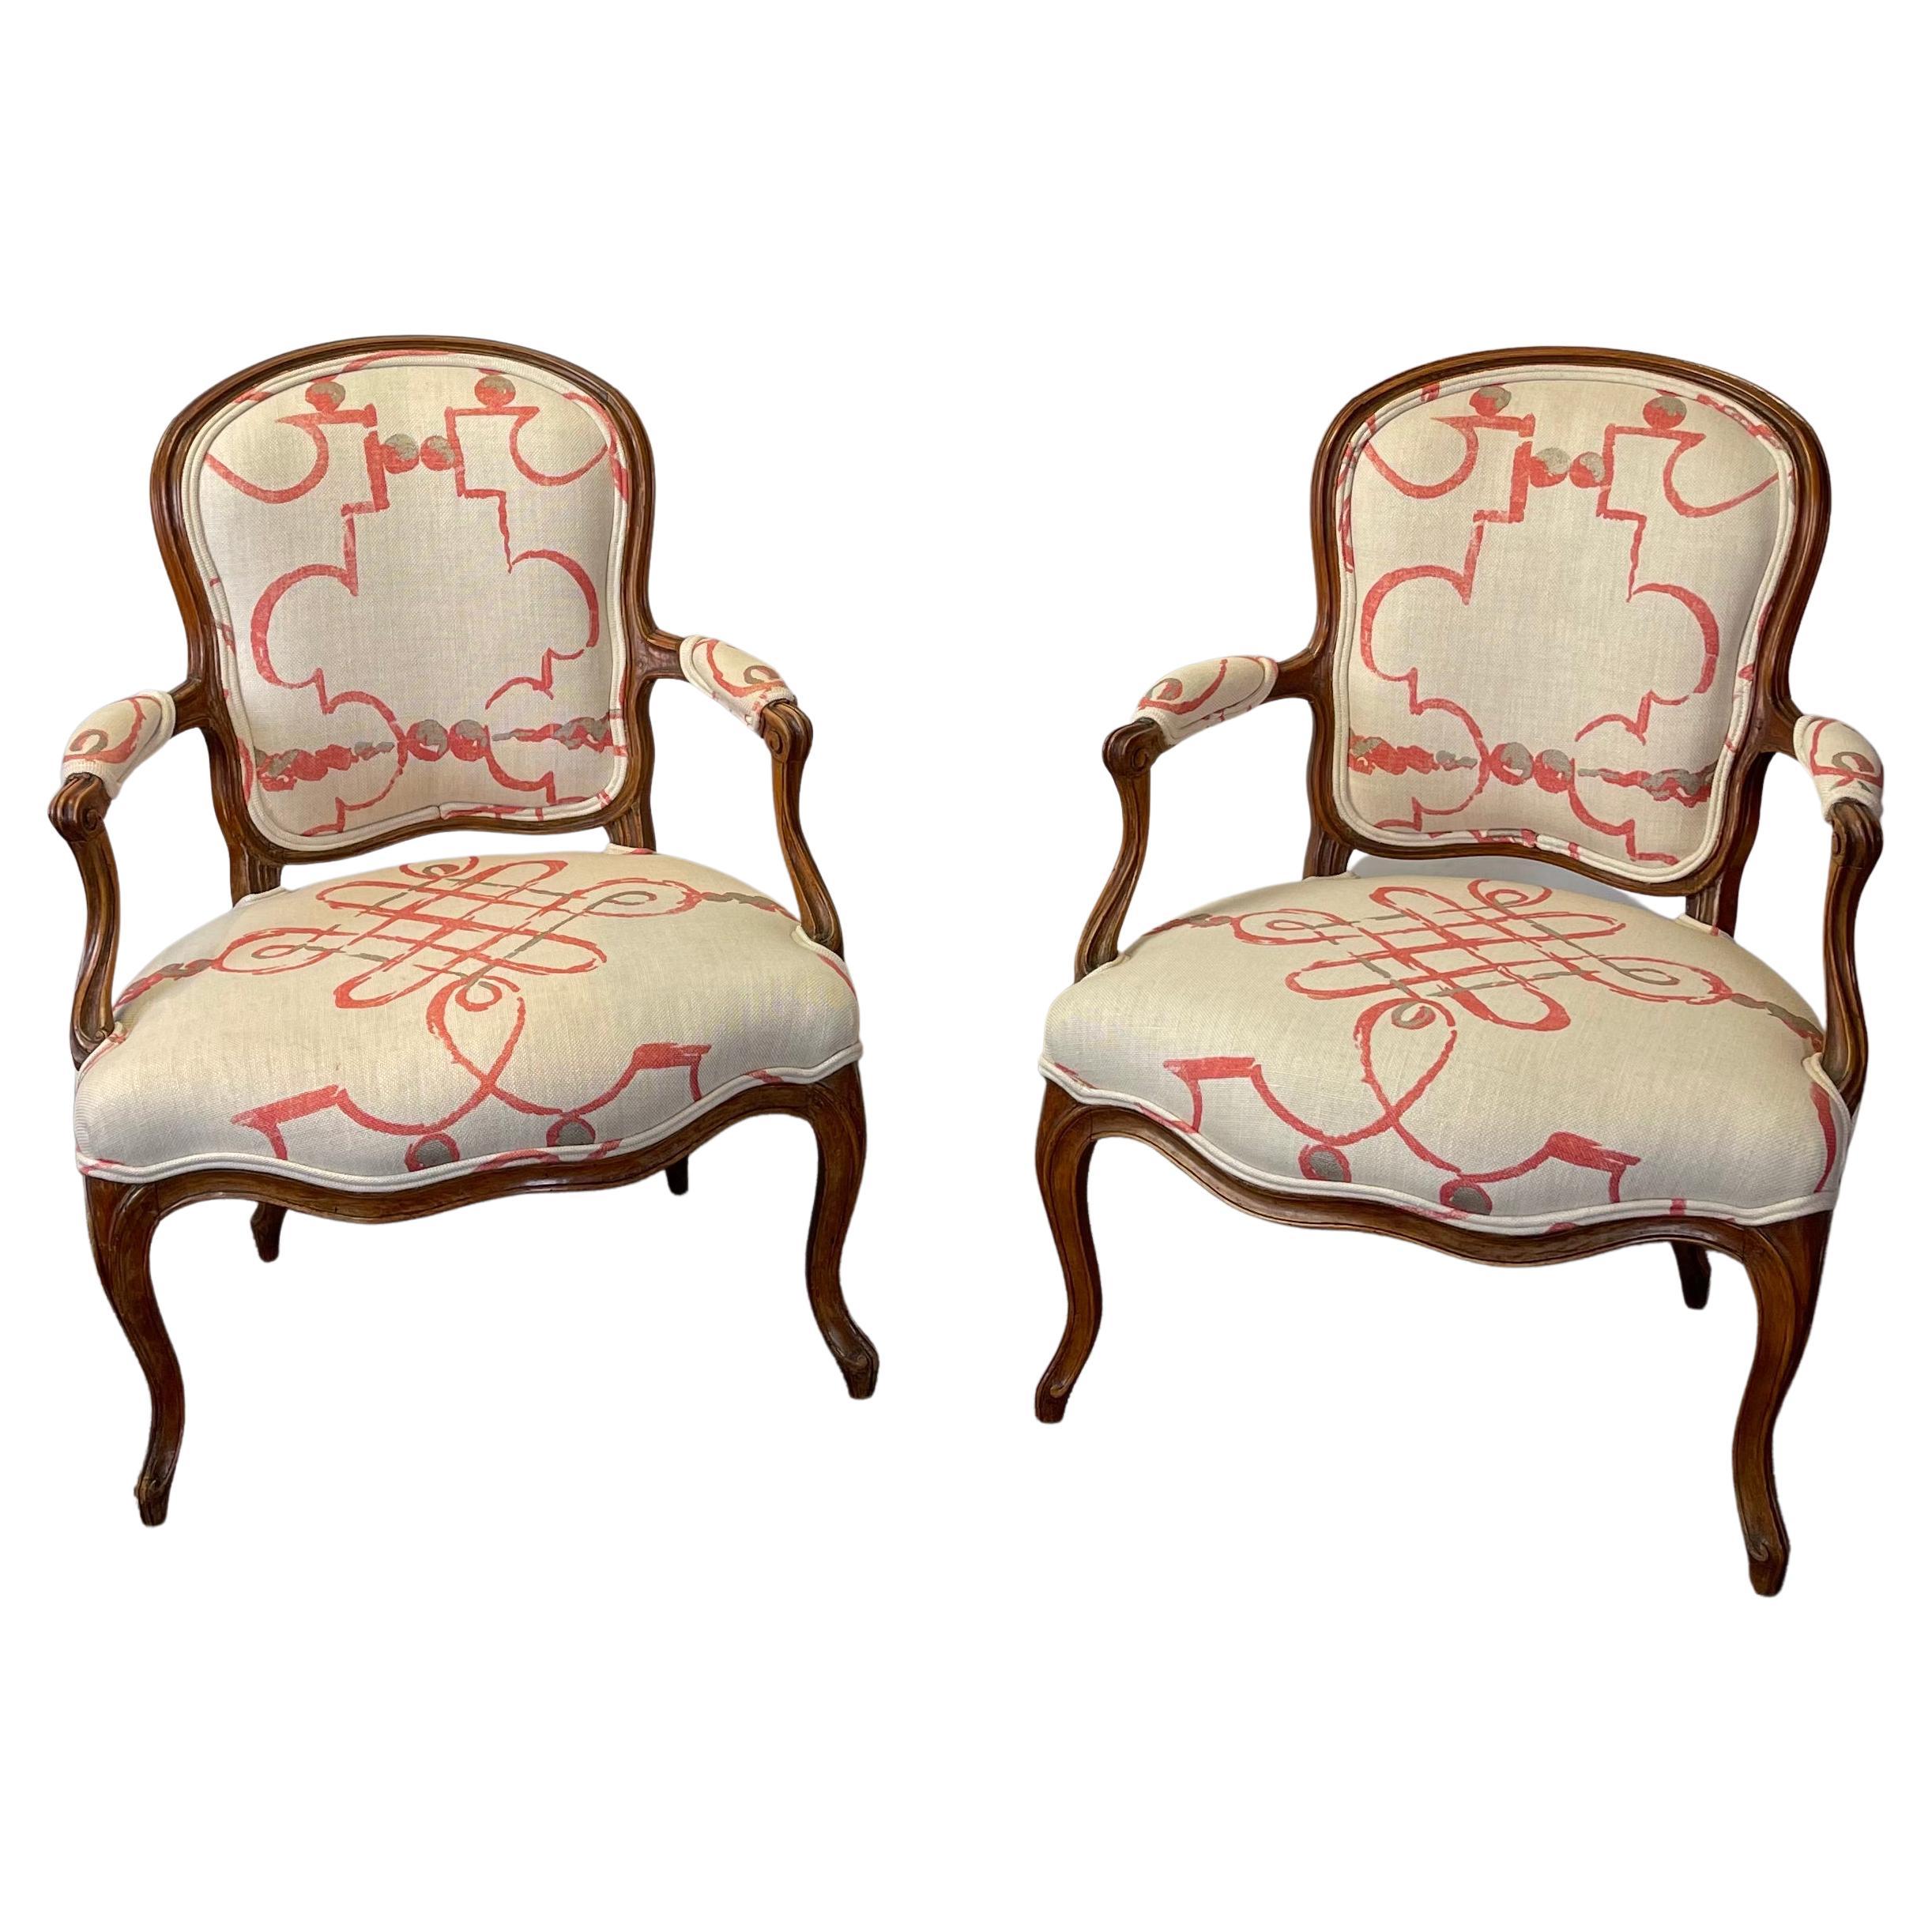 Pair of Late 18th Century French Carved Walnut Fauteuils